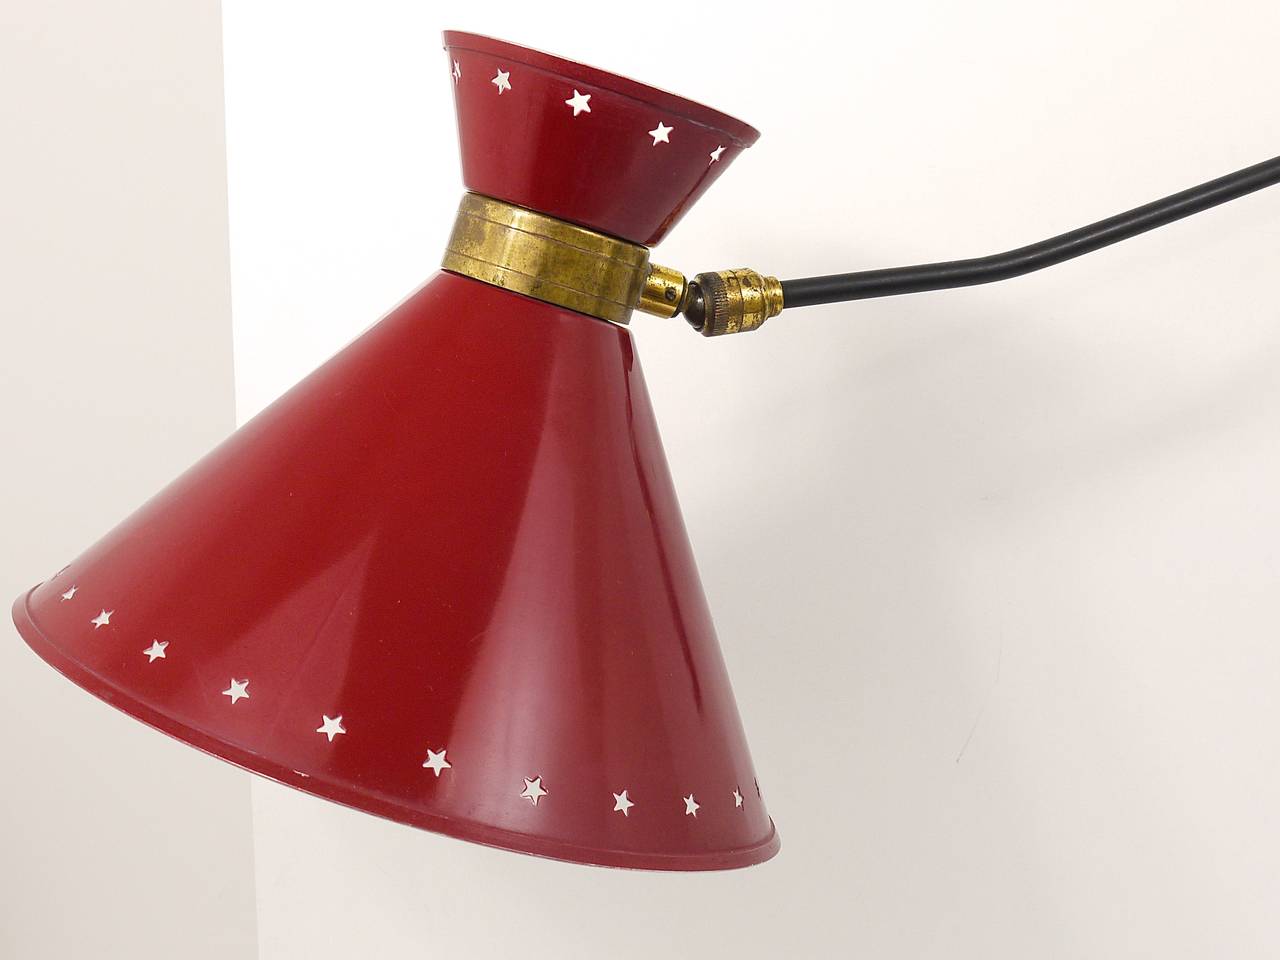 A beautiful articulating arm sconce by Rene Mathieu, France, 1950s. 180 degree adjustable, has a lovely star perforated red lampshade and nice brass details. In very good original condition with nice patina. Professionally rewired. 

Diameter of